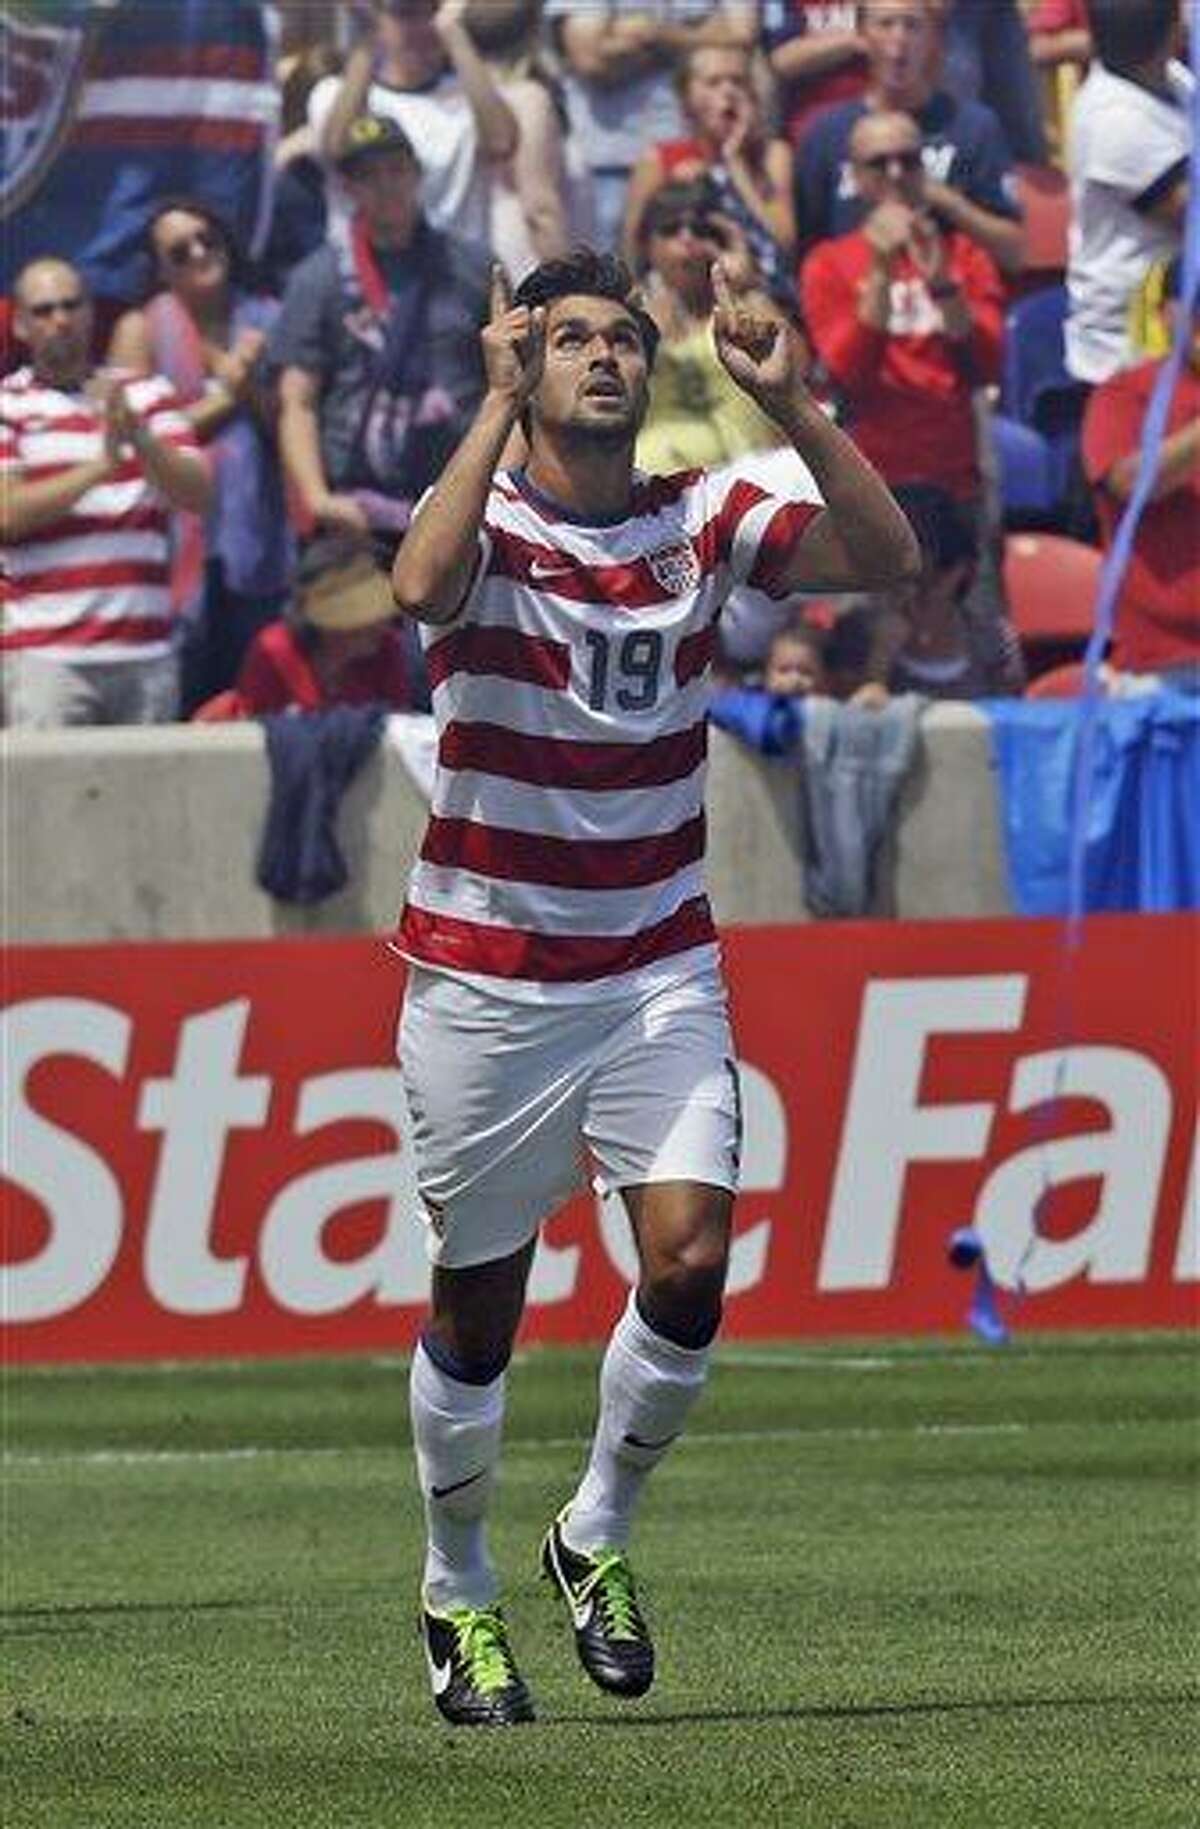 United States' Chris Wondolowski (19) celebrates after scoring against Cuba during the second half of a CONCACAF Gold Cup soccer game on Saturday, July 13, 2013, in Sandy, Utah. United States defeated Cuba 4-1. (AP Photo/Rick Bowmer)